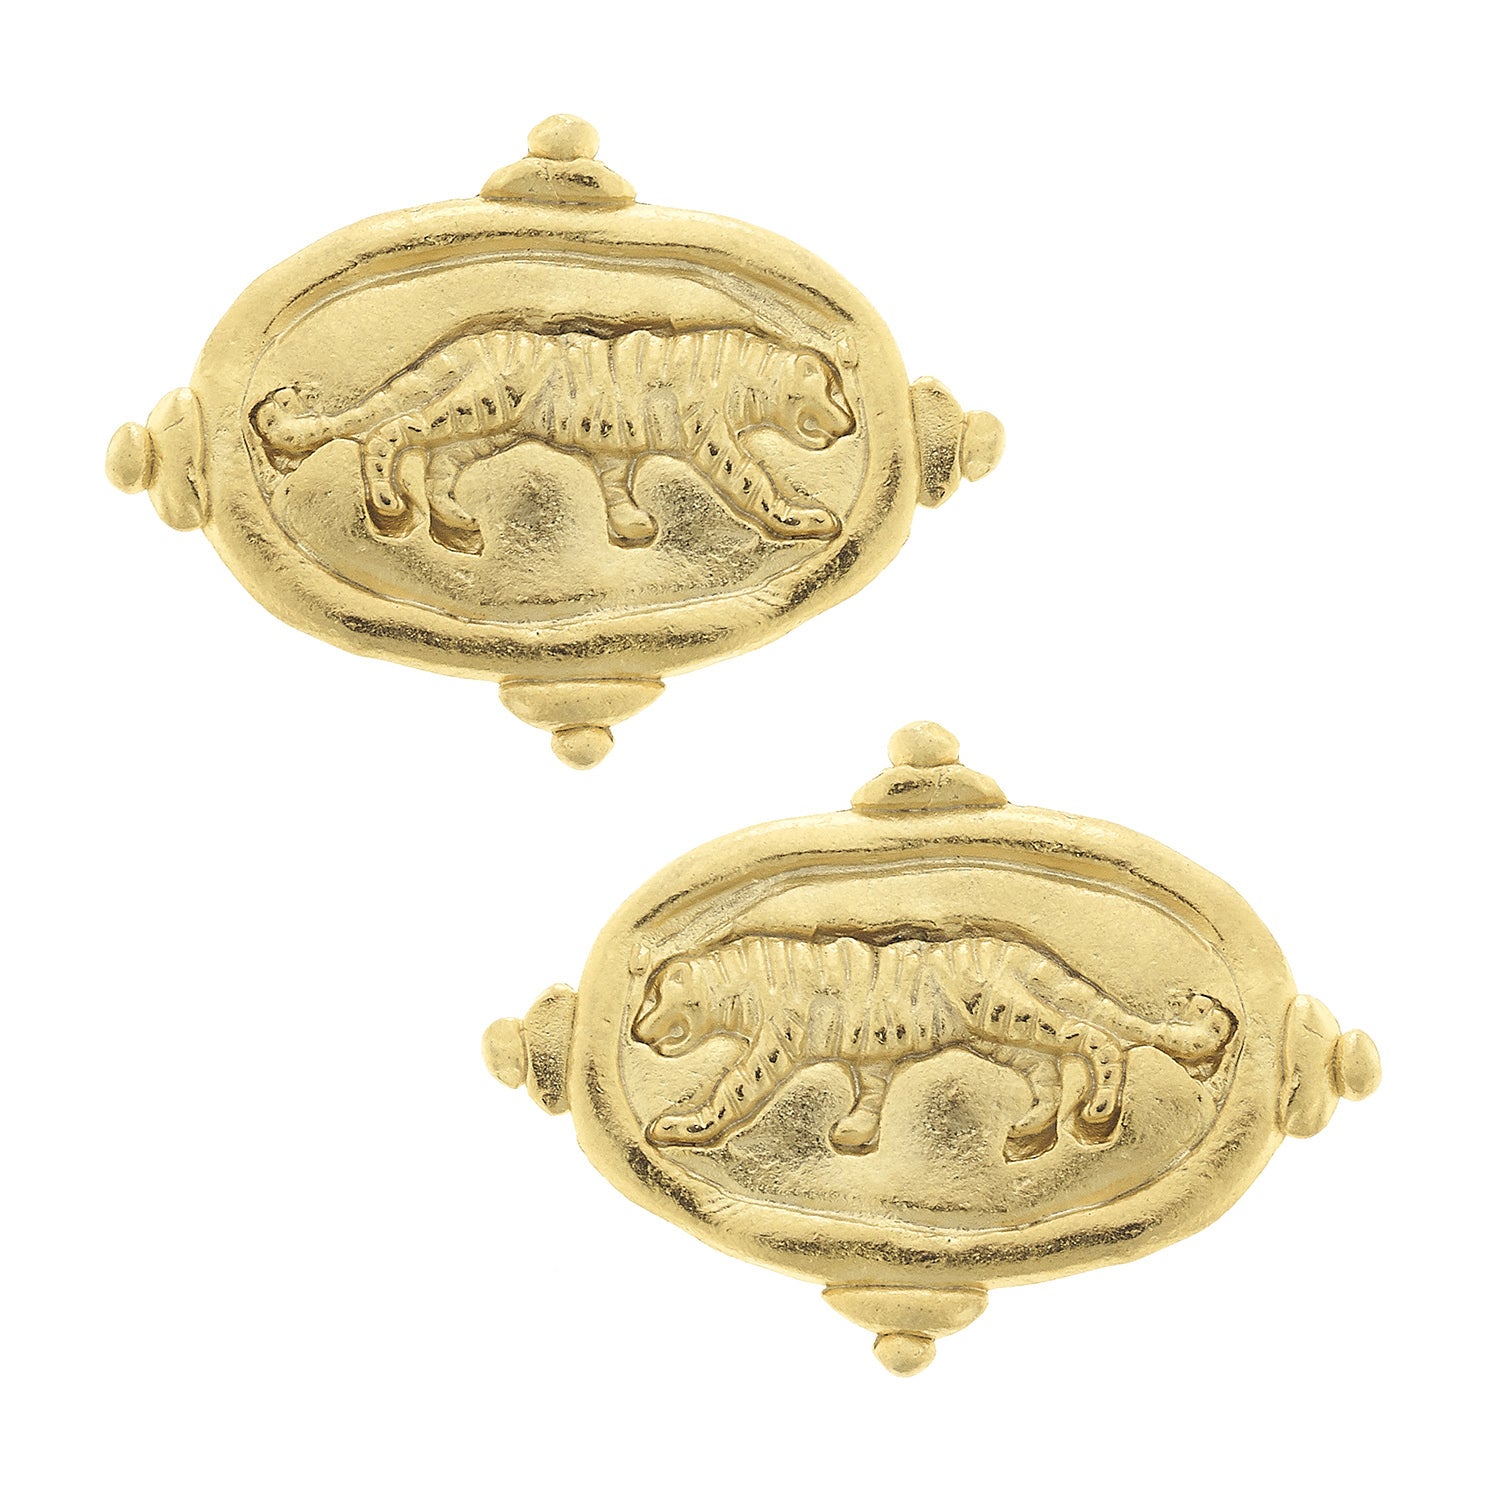 Susan Shaw Handcast Tiger Stud Earrings, Gold Plated